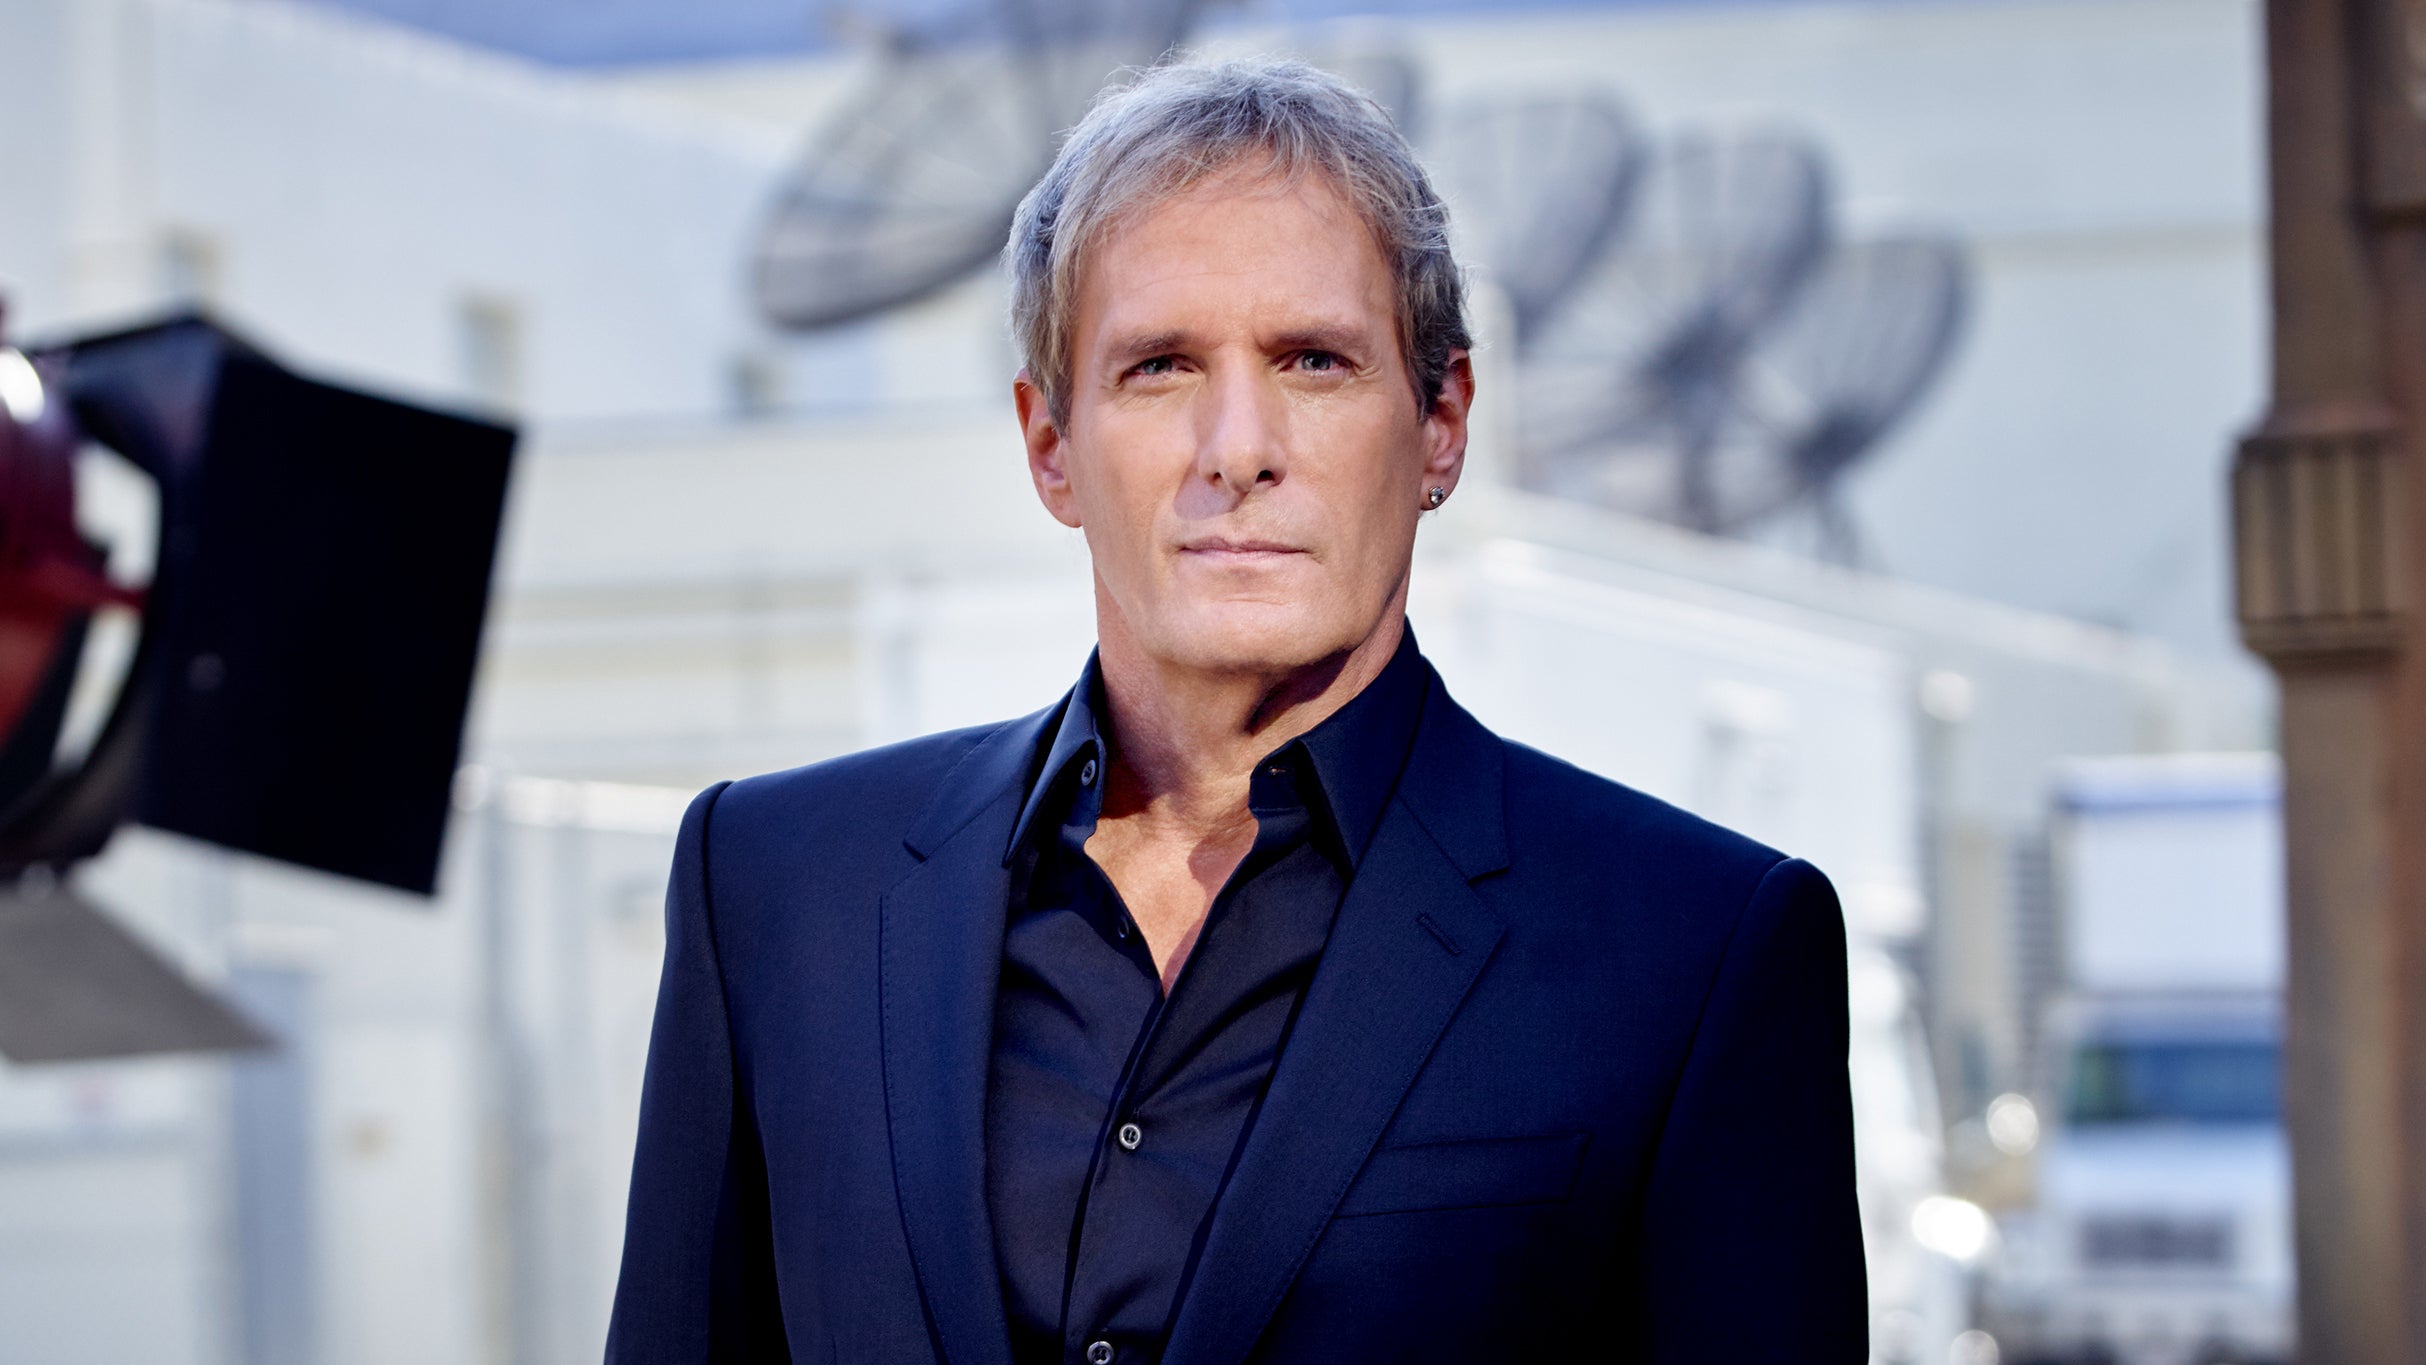 Michael Bolton in Waukegan promo photo for Genesee Theatre presale offer code